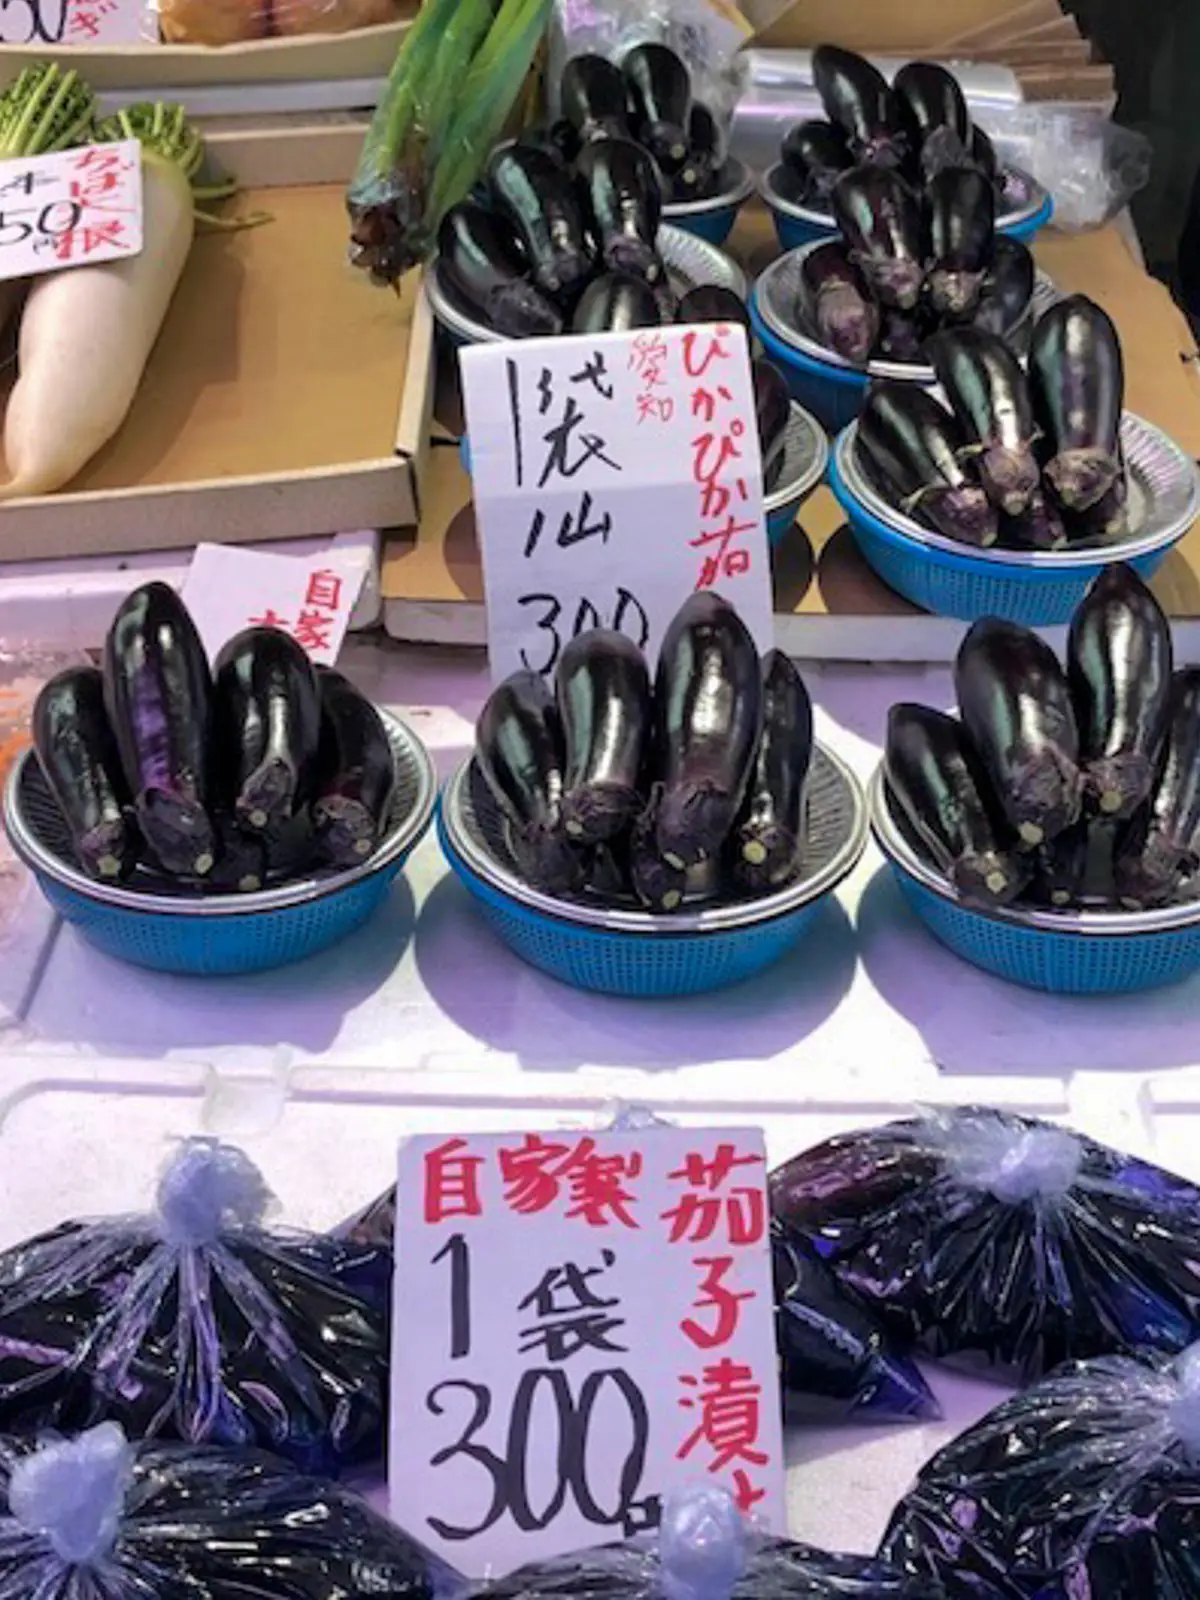 Several bowls filled with Japanese eggplants on display for sale in a market. 